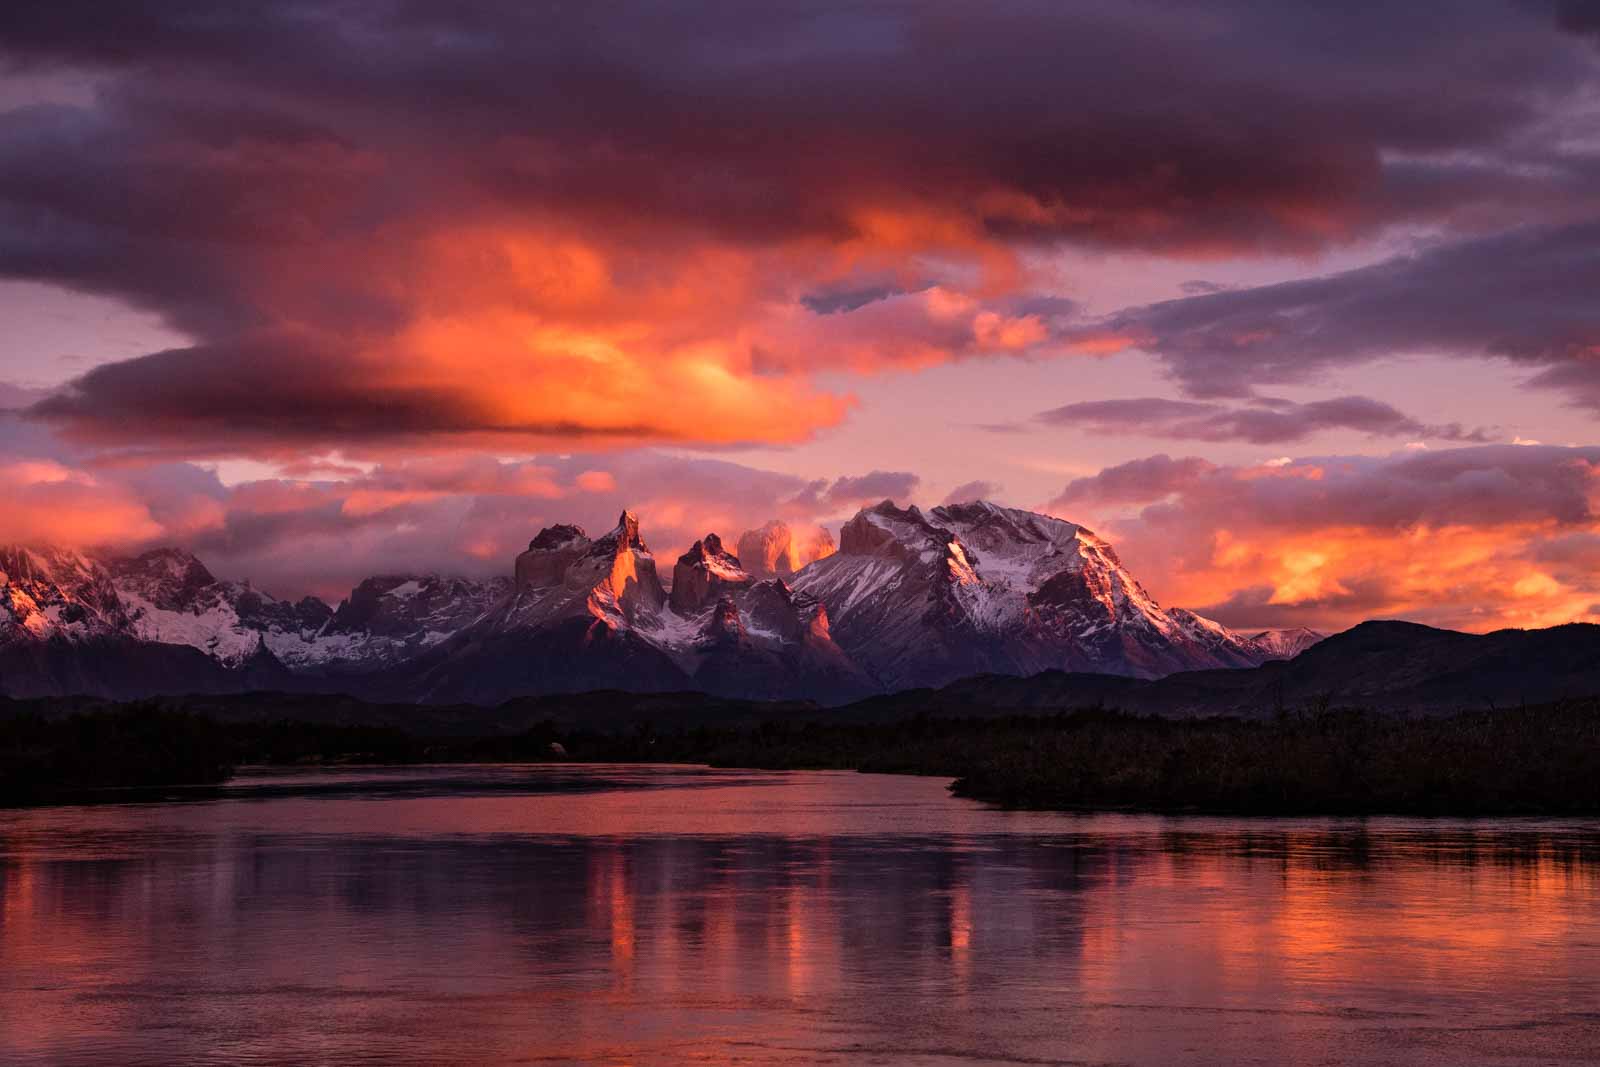 PATAGONIA : A run trip to the end of the world